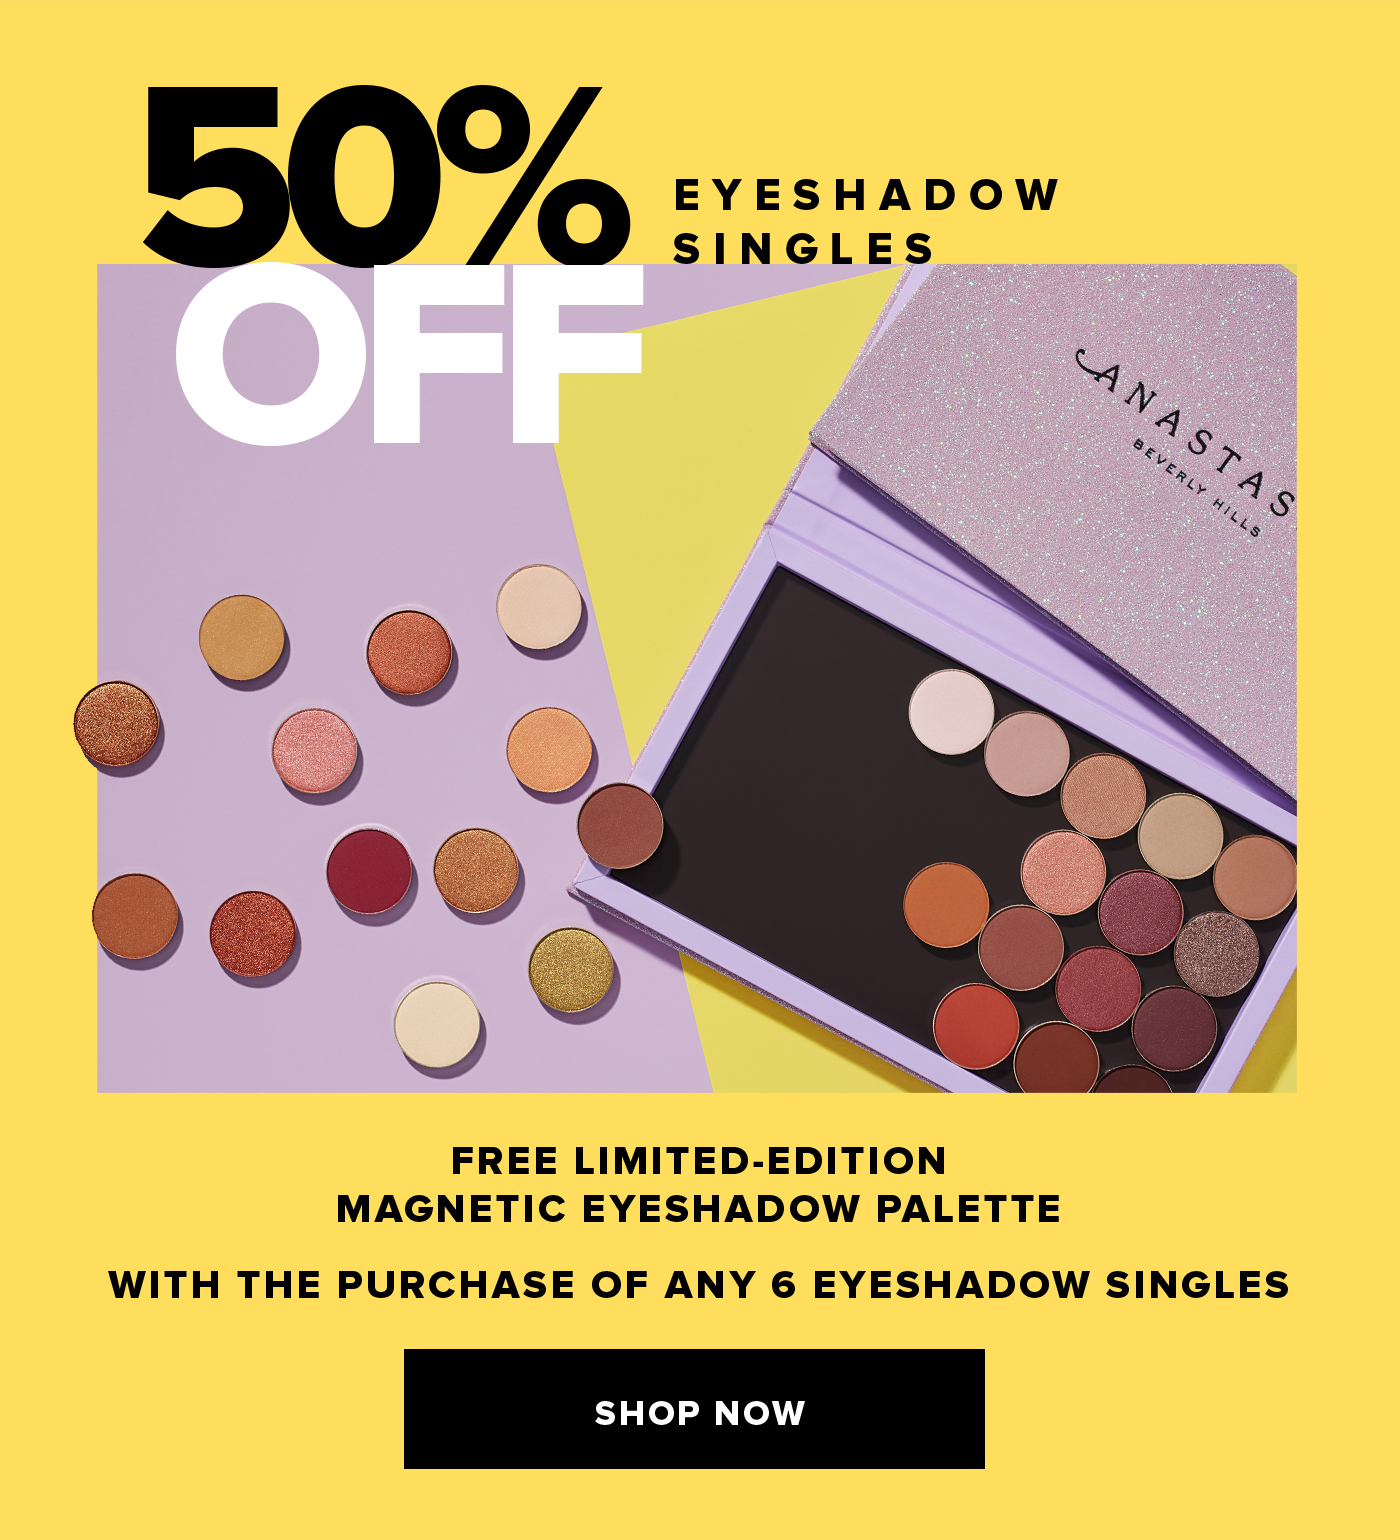 50% OFF EYESHADOW SINGLES FREE LIMITED-EDITION MAGNETIC EYESHADOW PALETTE WITH THE PURCHASE OF ANY 6 EYESHADOW SINGLES. SHOP NOW